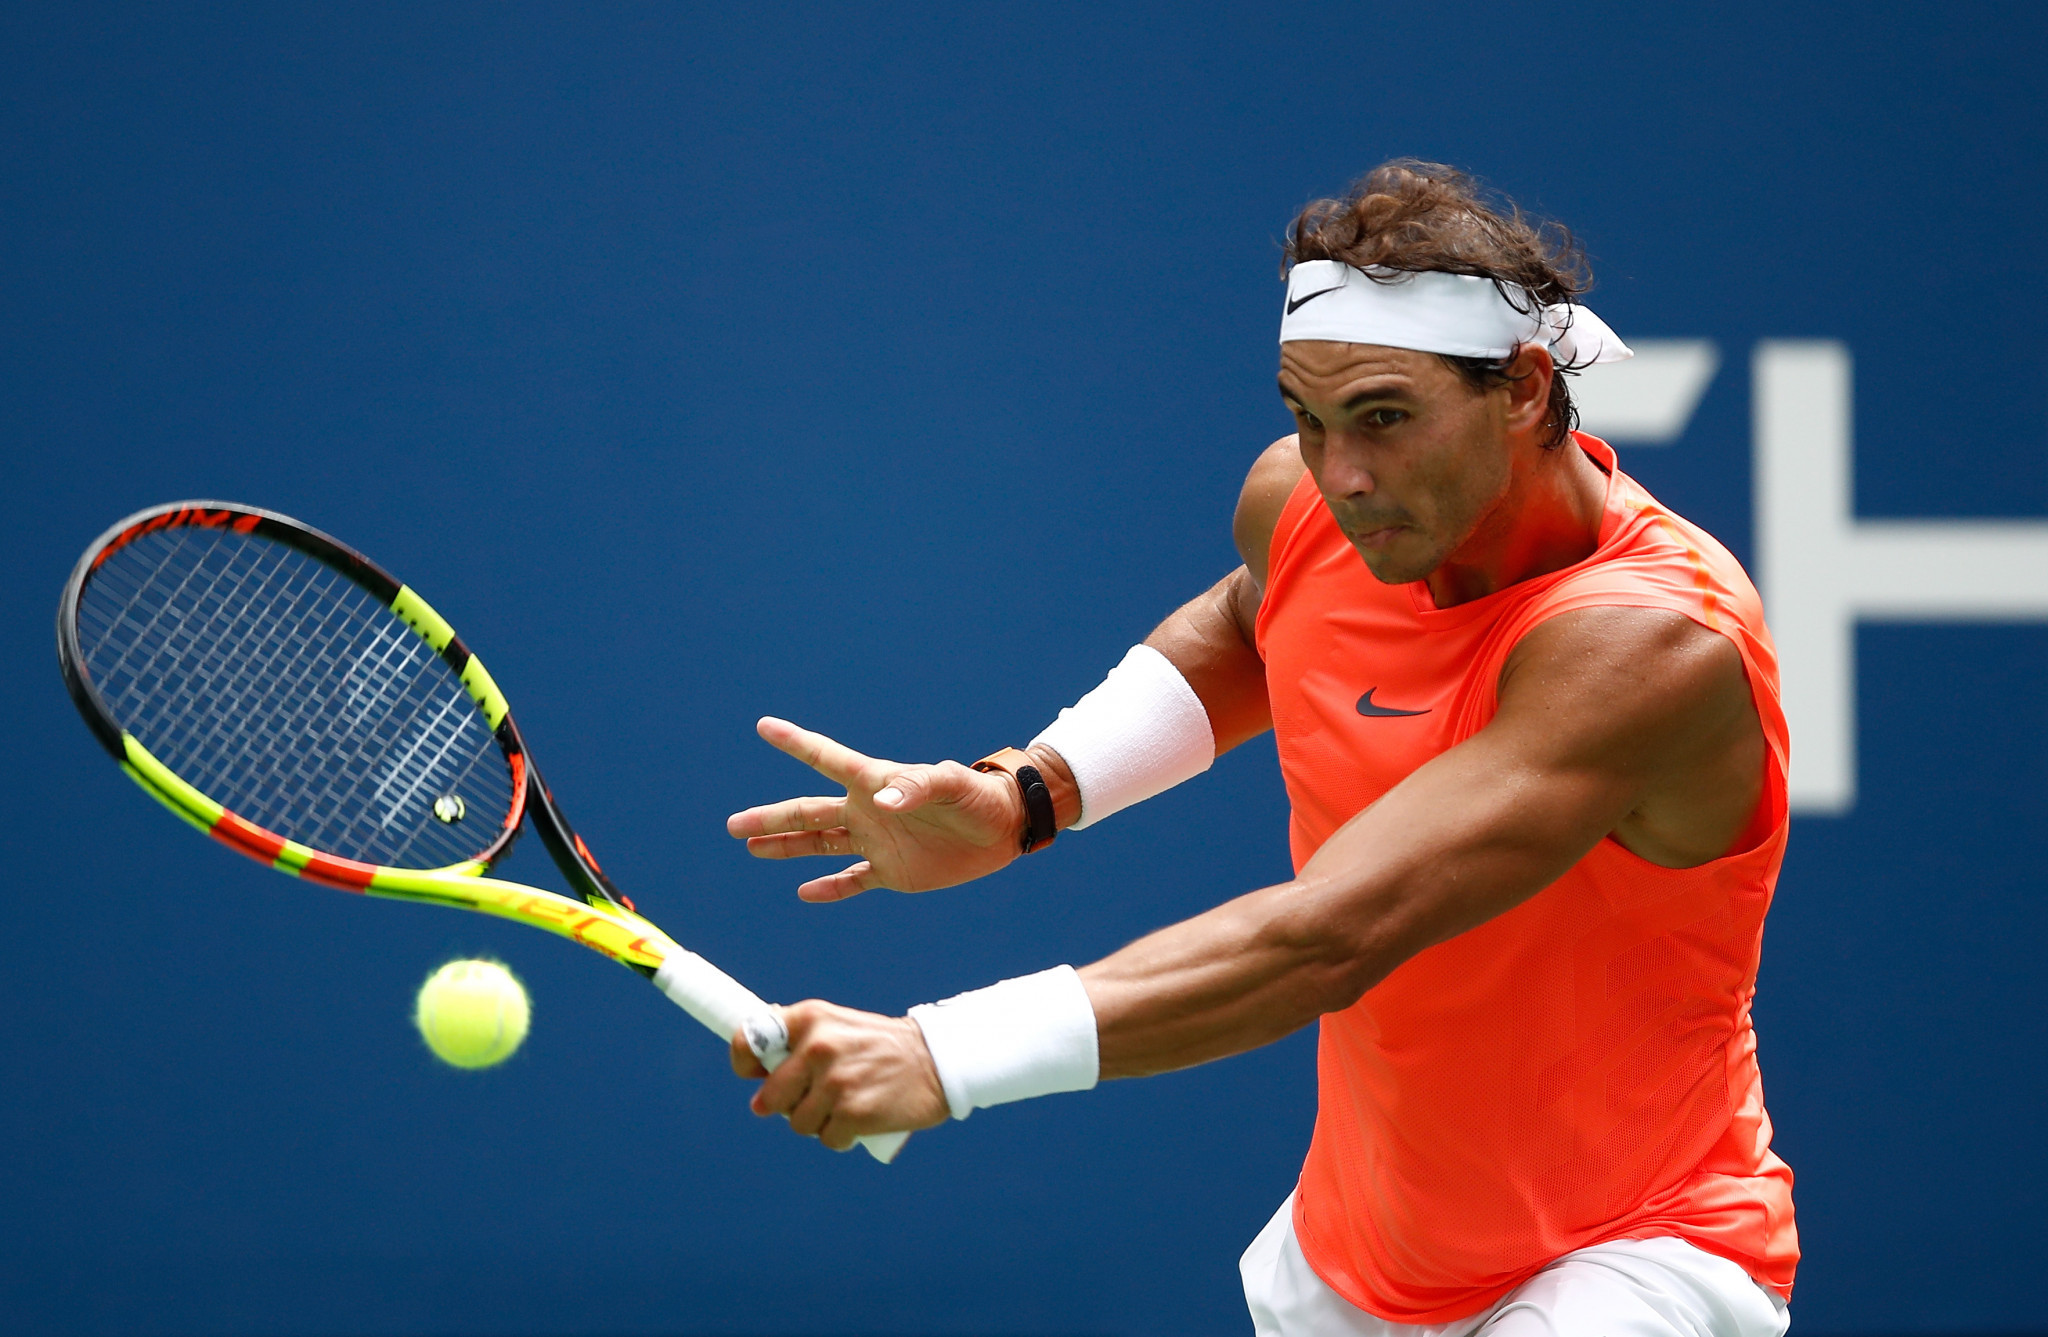 Rafael Nadal battled through four sets to reach the quarter finals at Flushing Meadows ©Getty Images